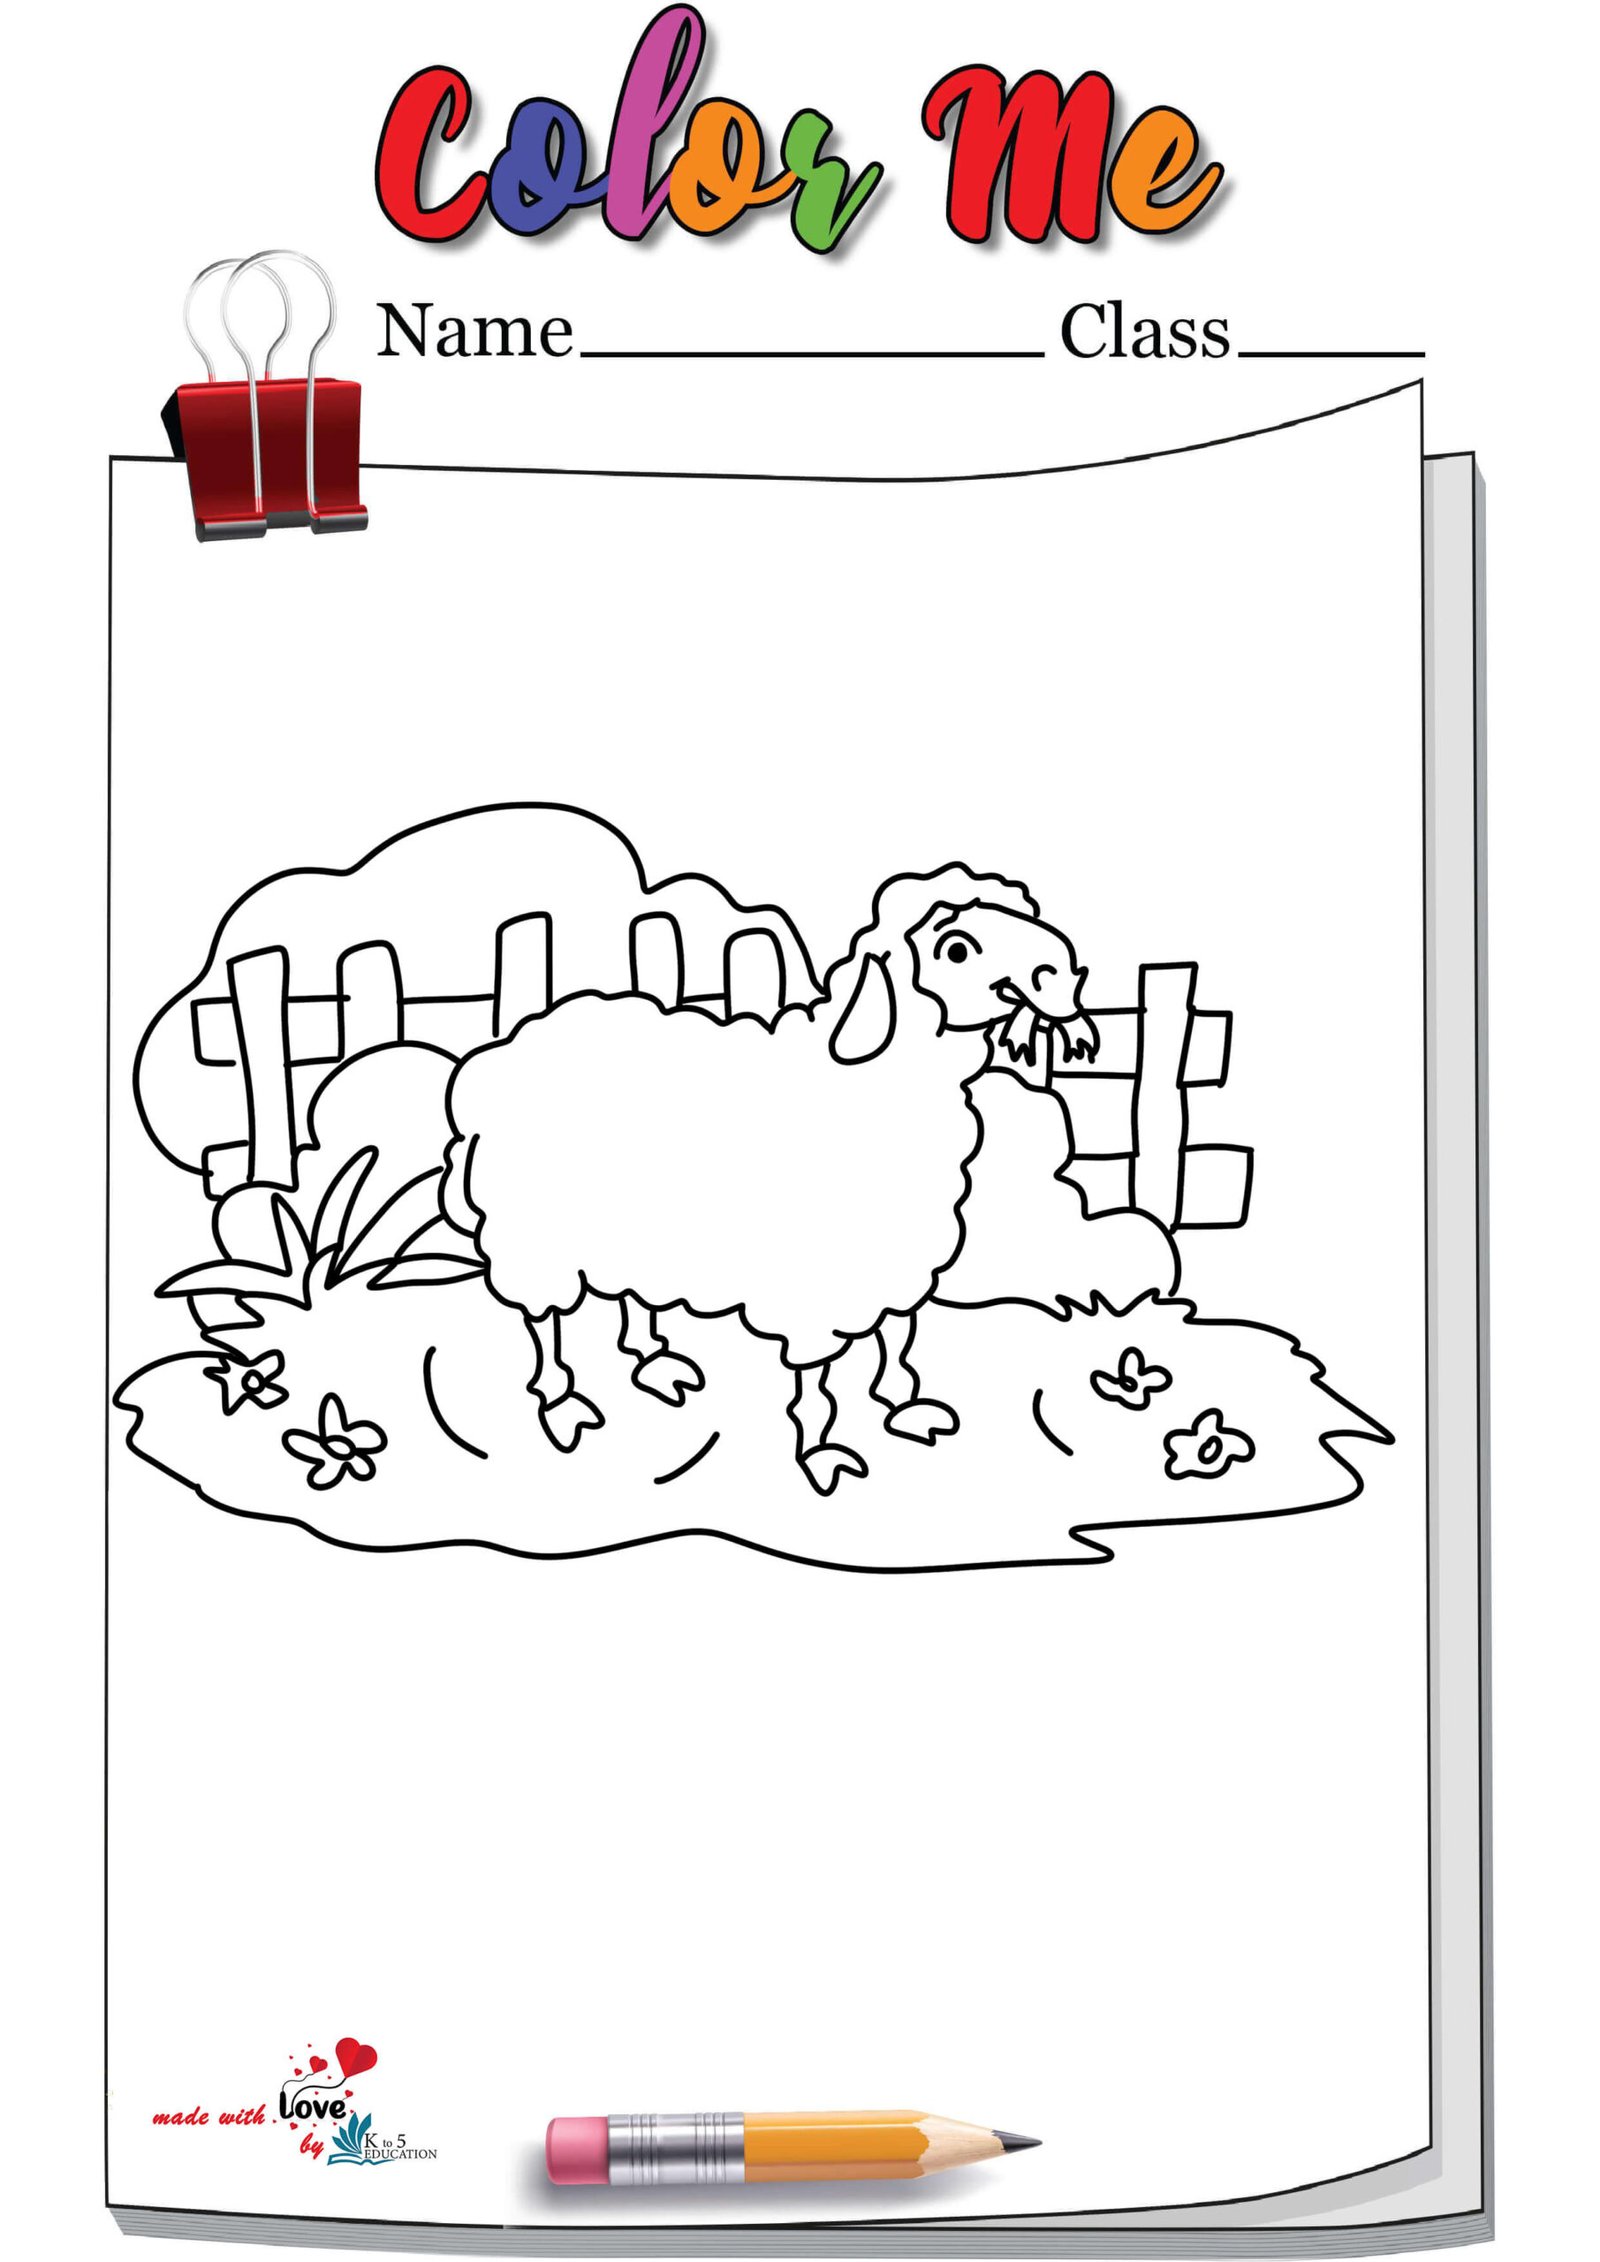 Sheep In A Garden Coloring Page